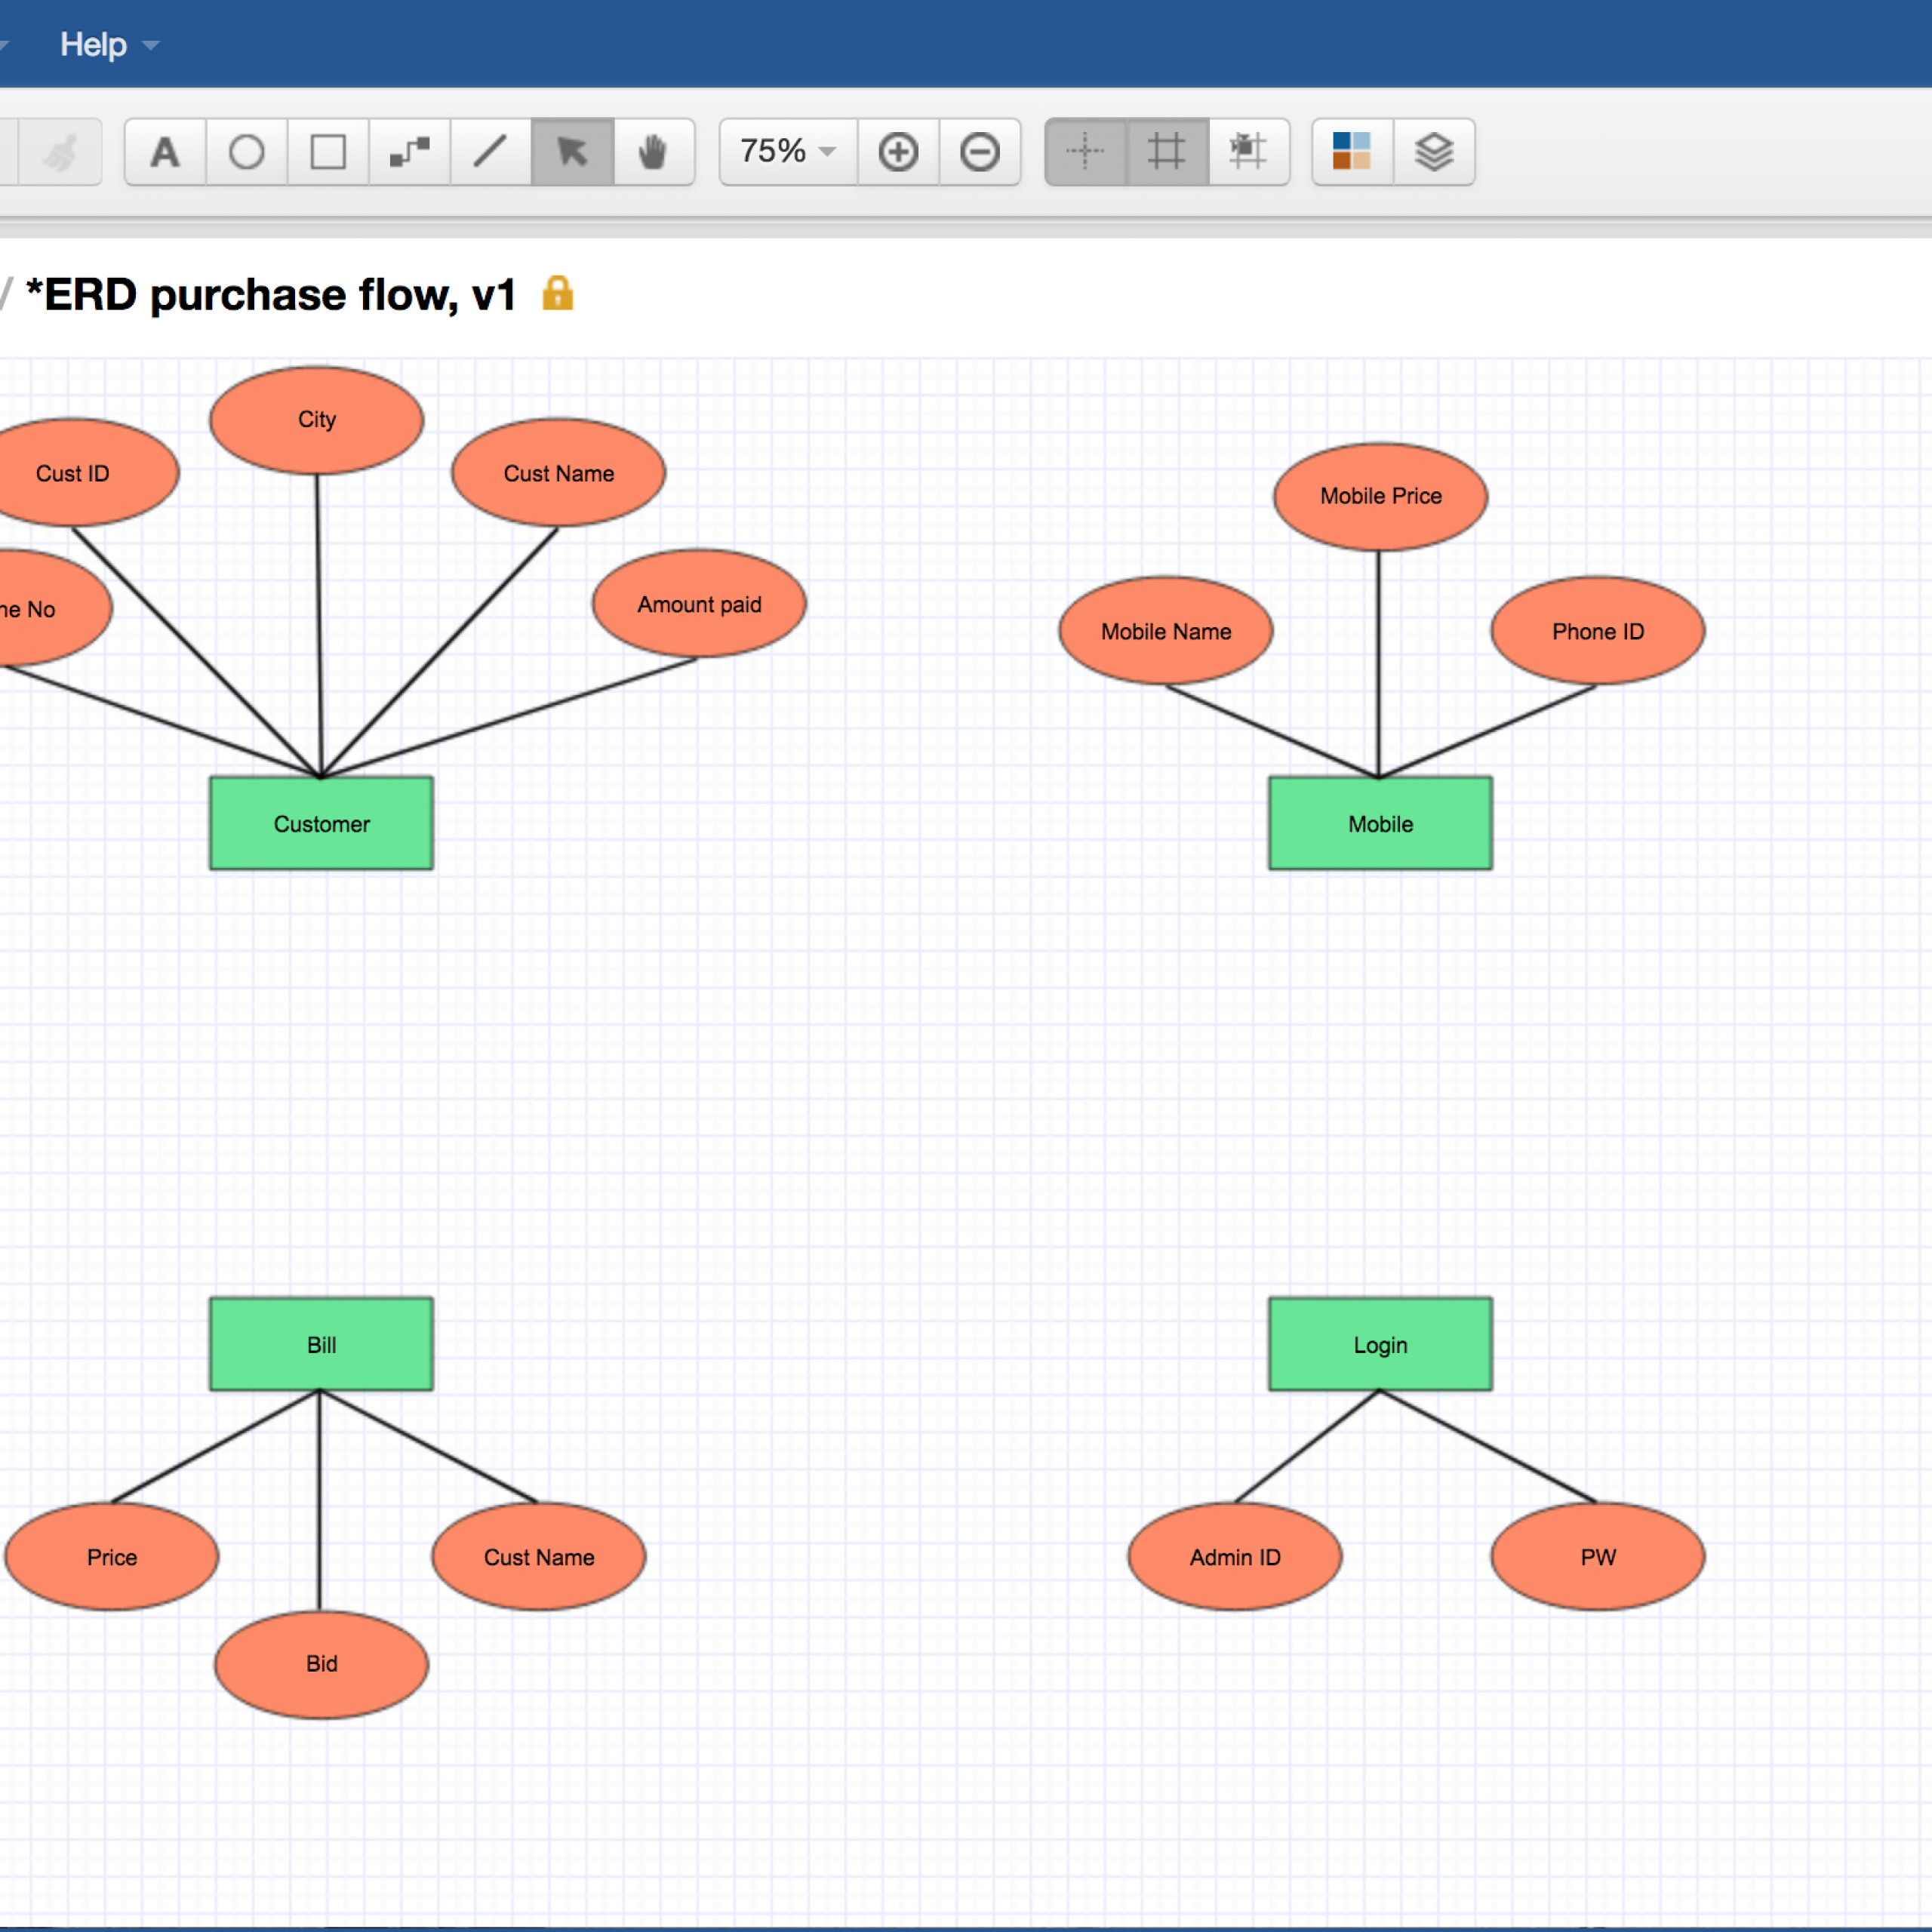 How To Draw An Entity-Relationship Diagram inside How To Draw Er Diagram For Project